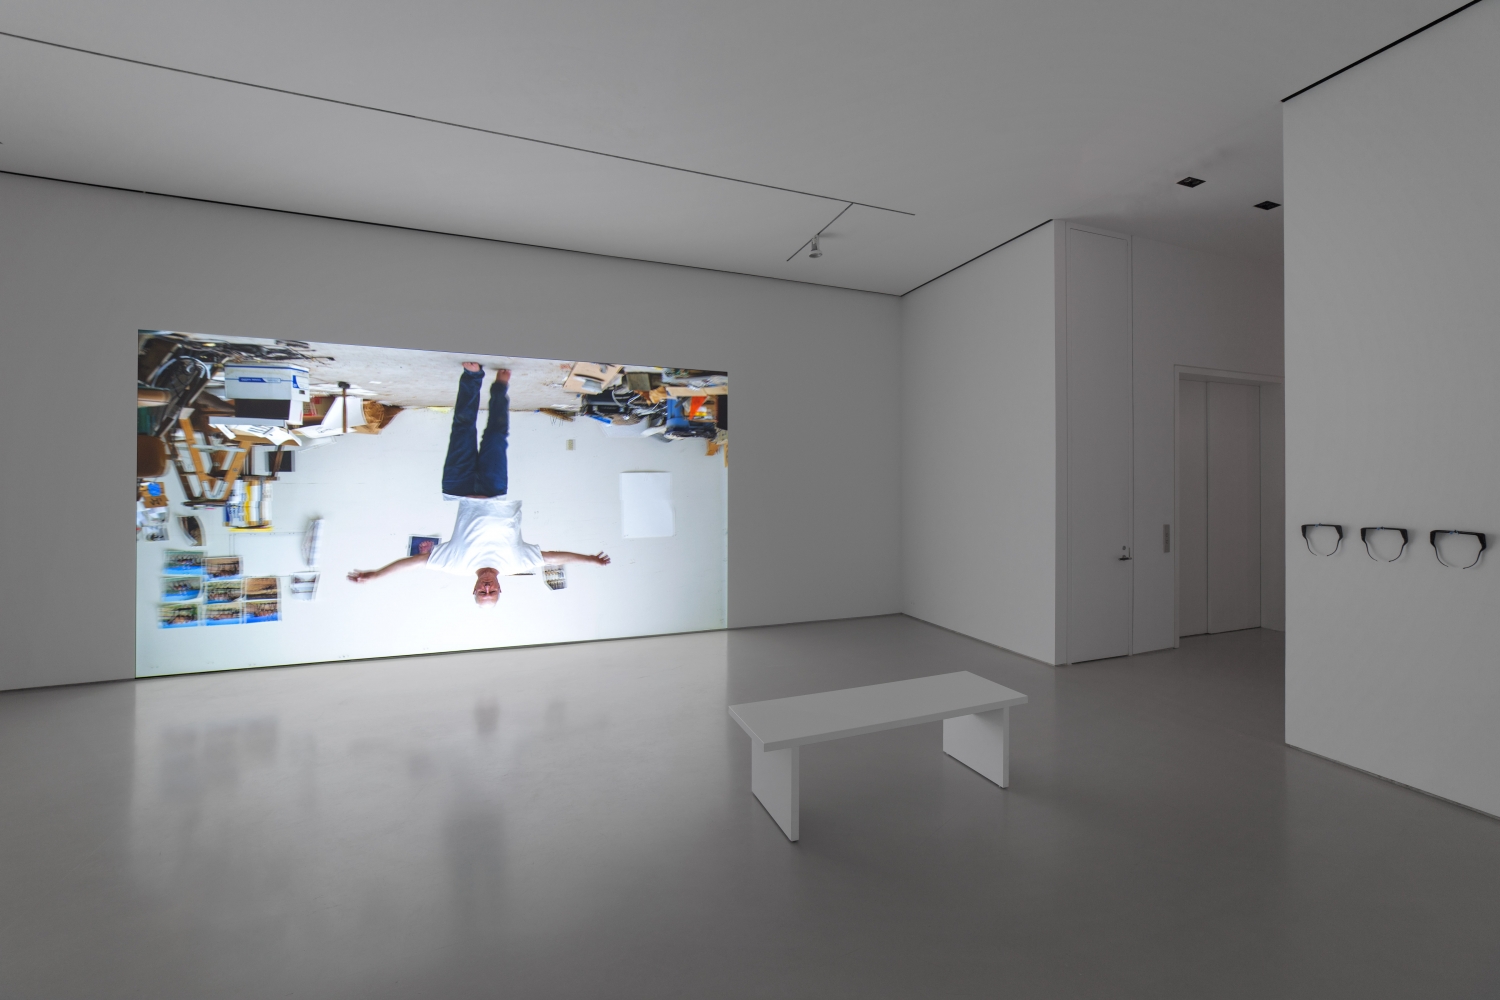 gallery installation view showing a projection of an upside down man walking with arms outstretched